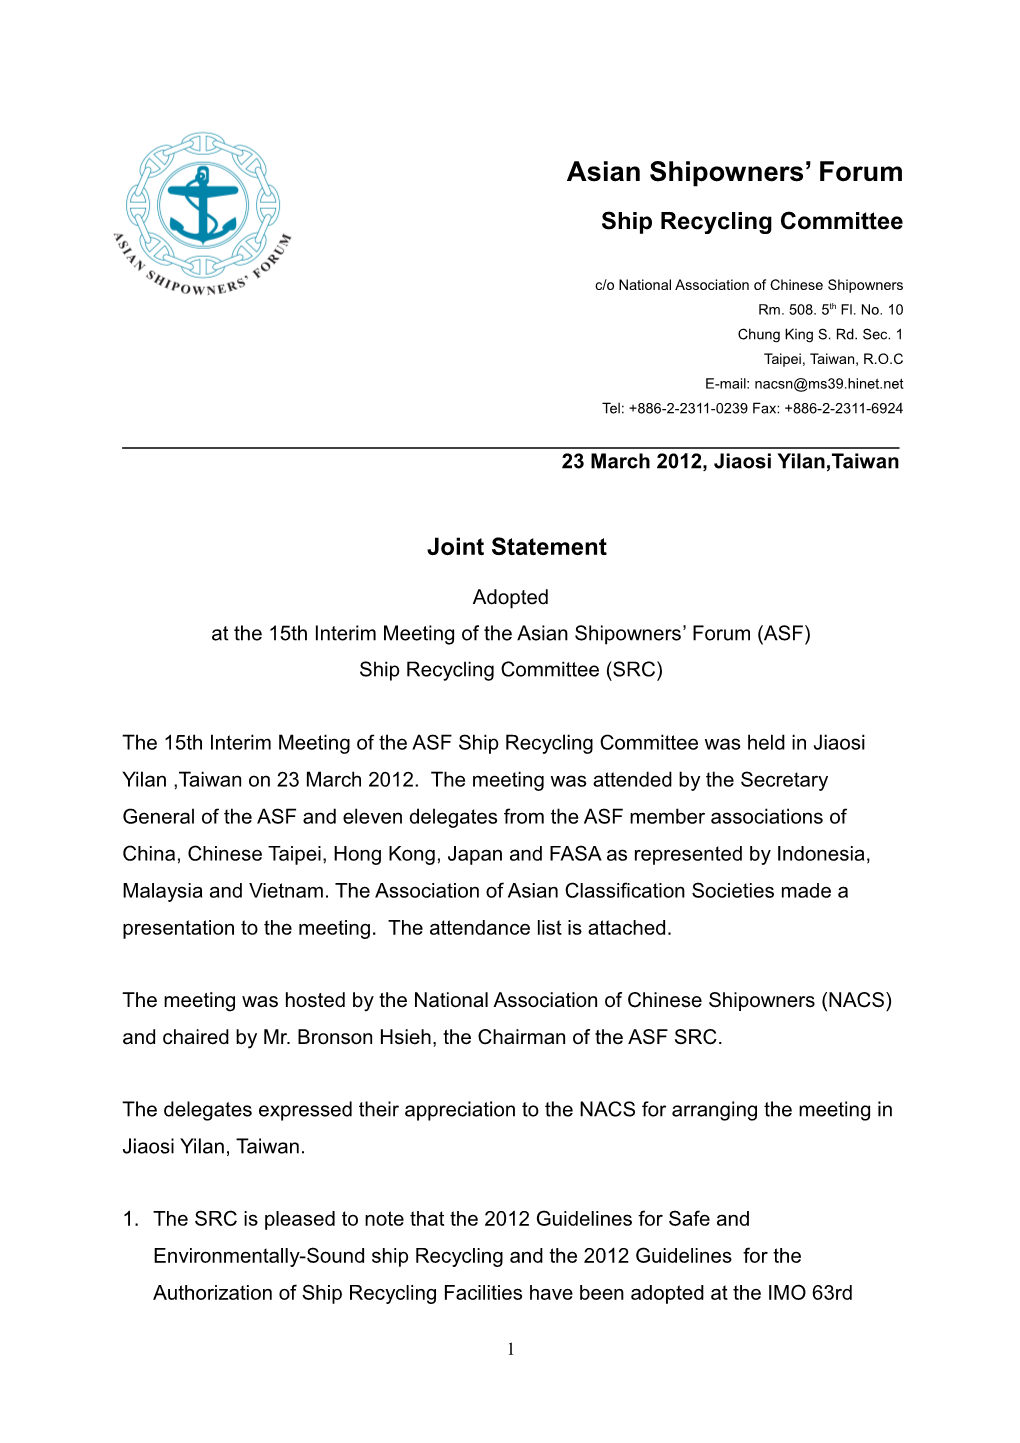 C/O National Association of Chinese Shipowners